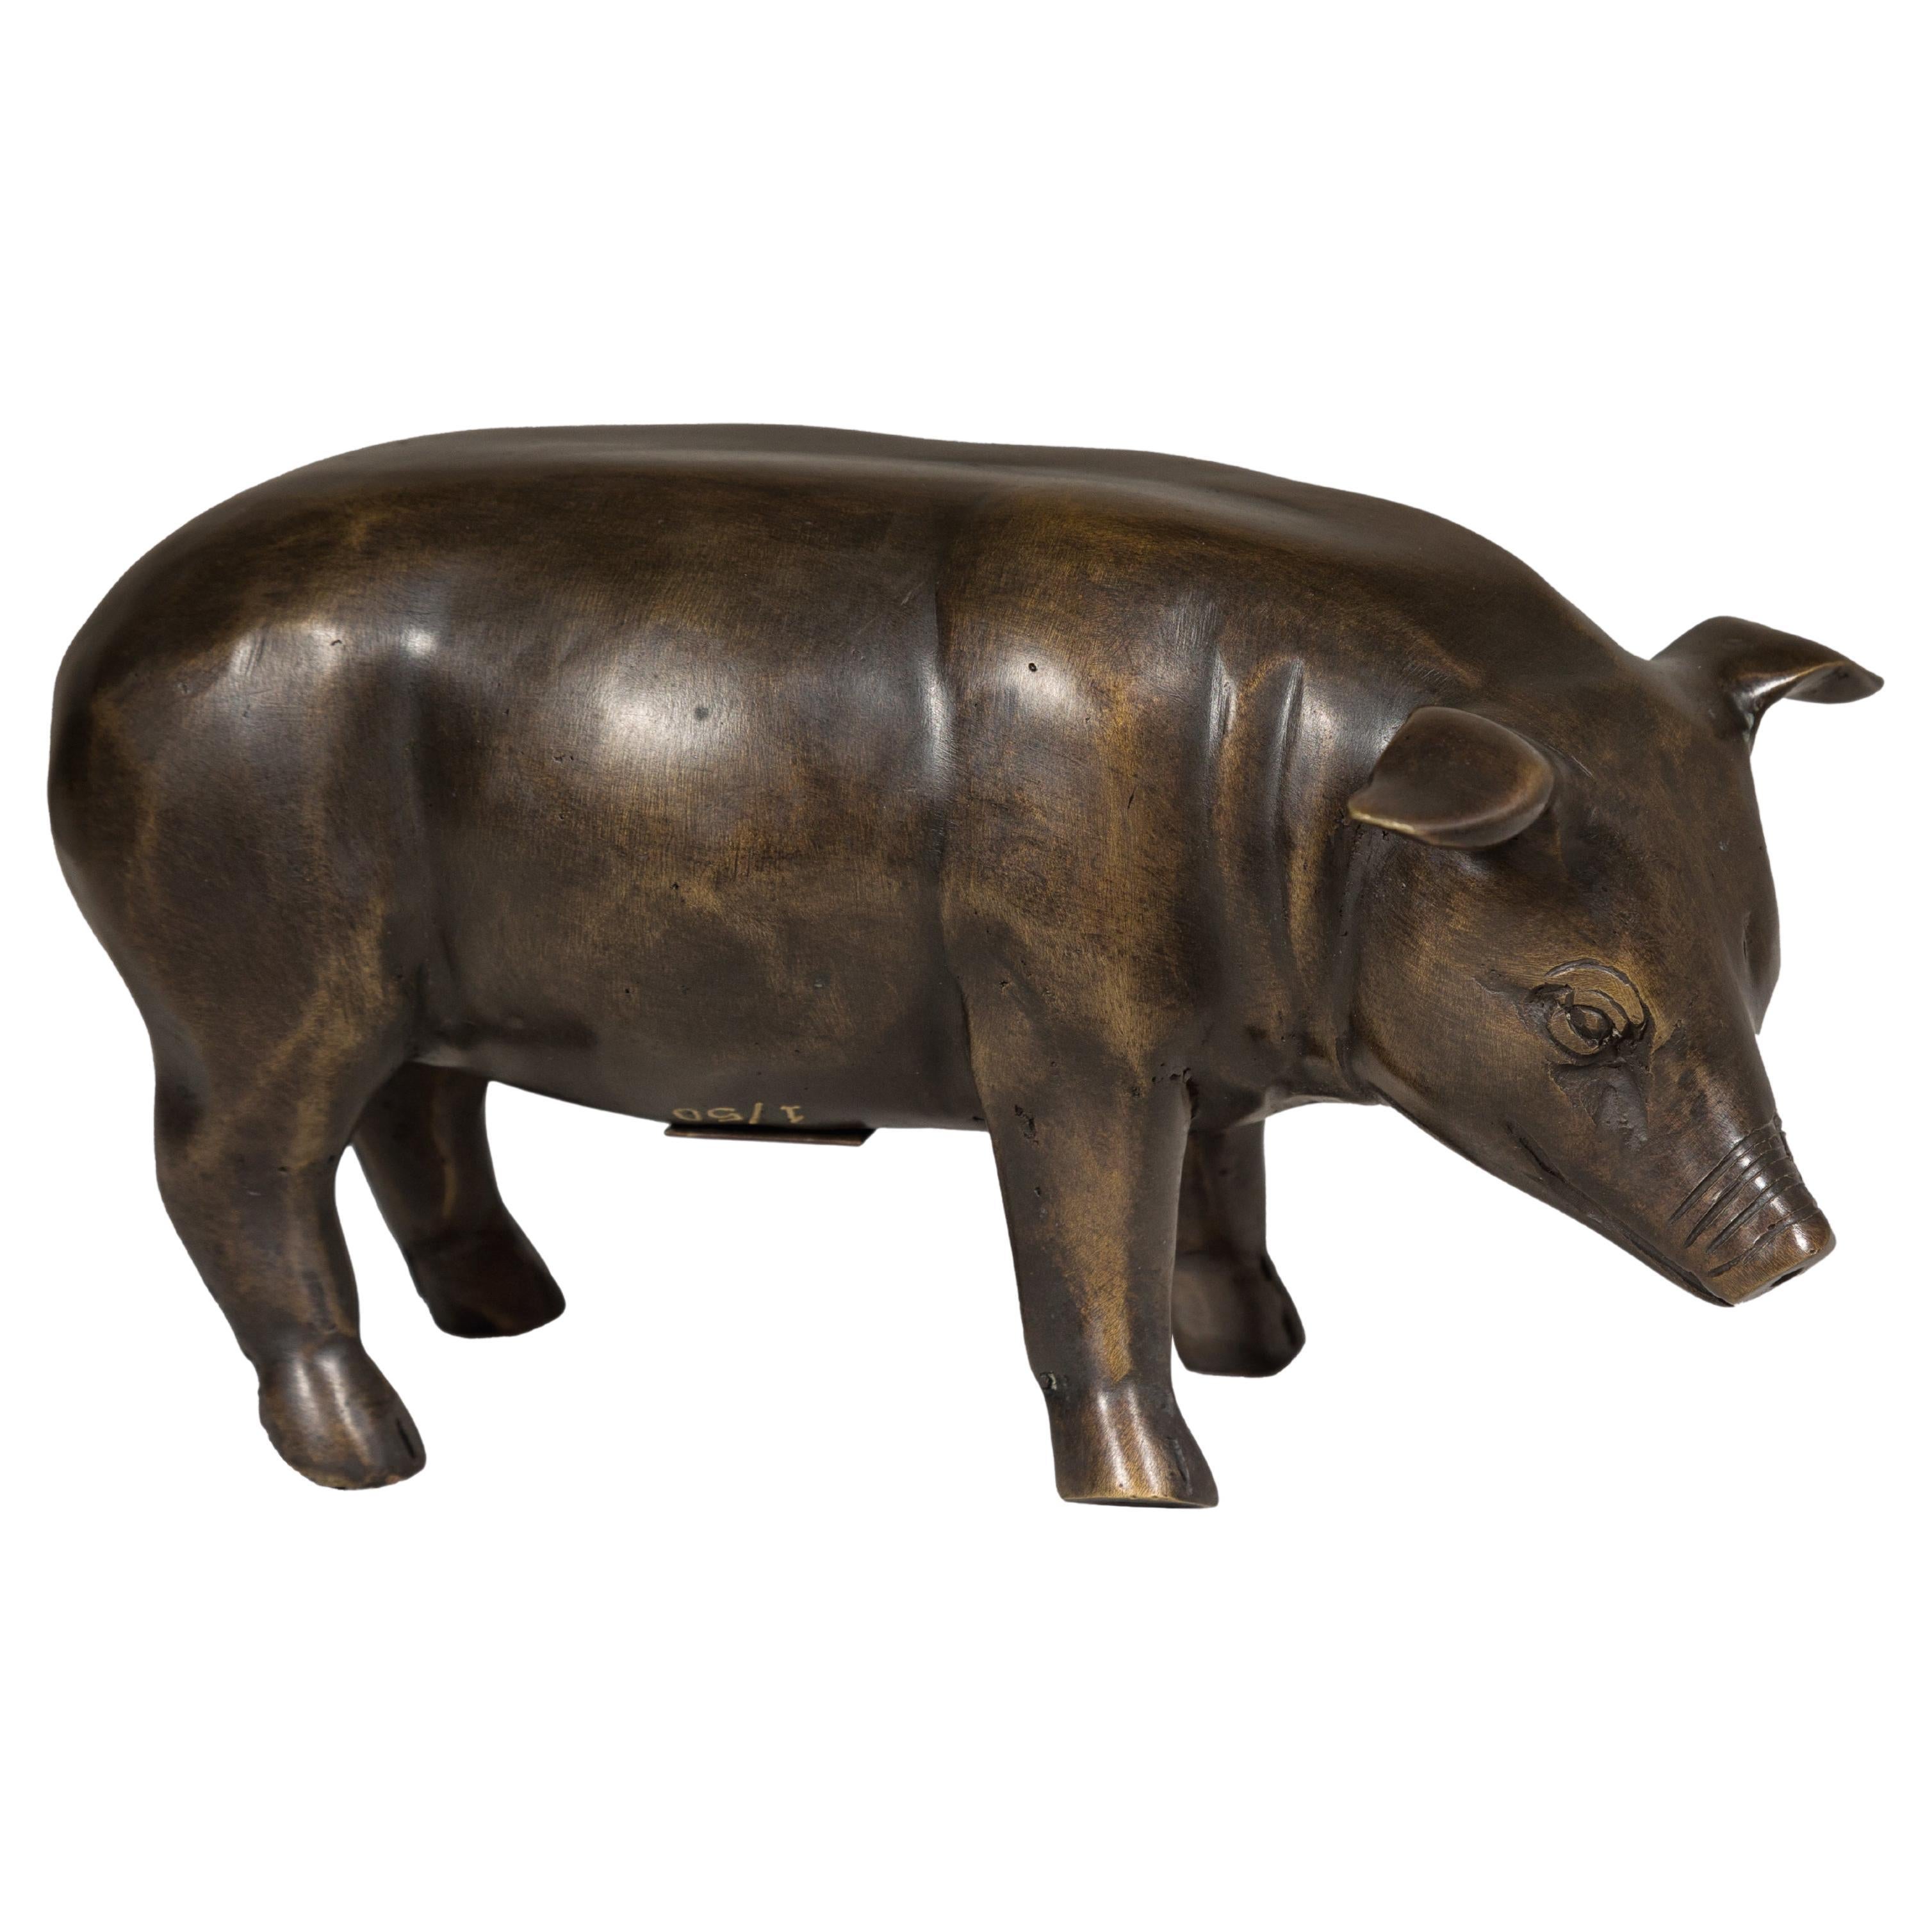 Limited Edition Bronze Pig Statuette from the Randolph Rose Collection